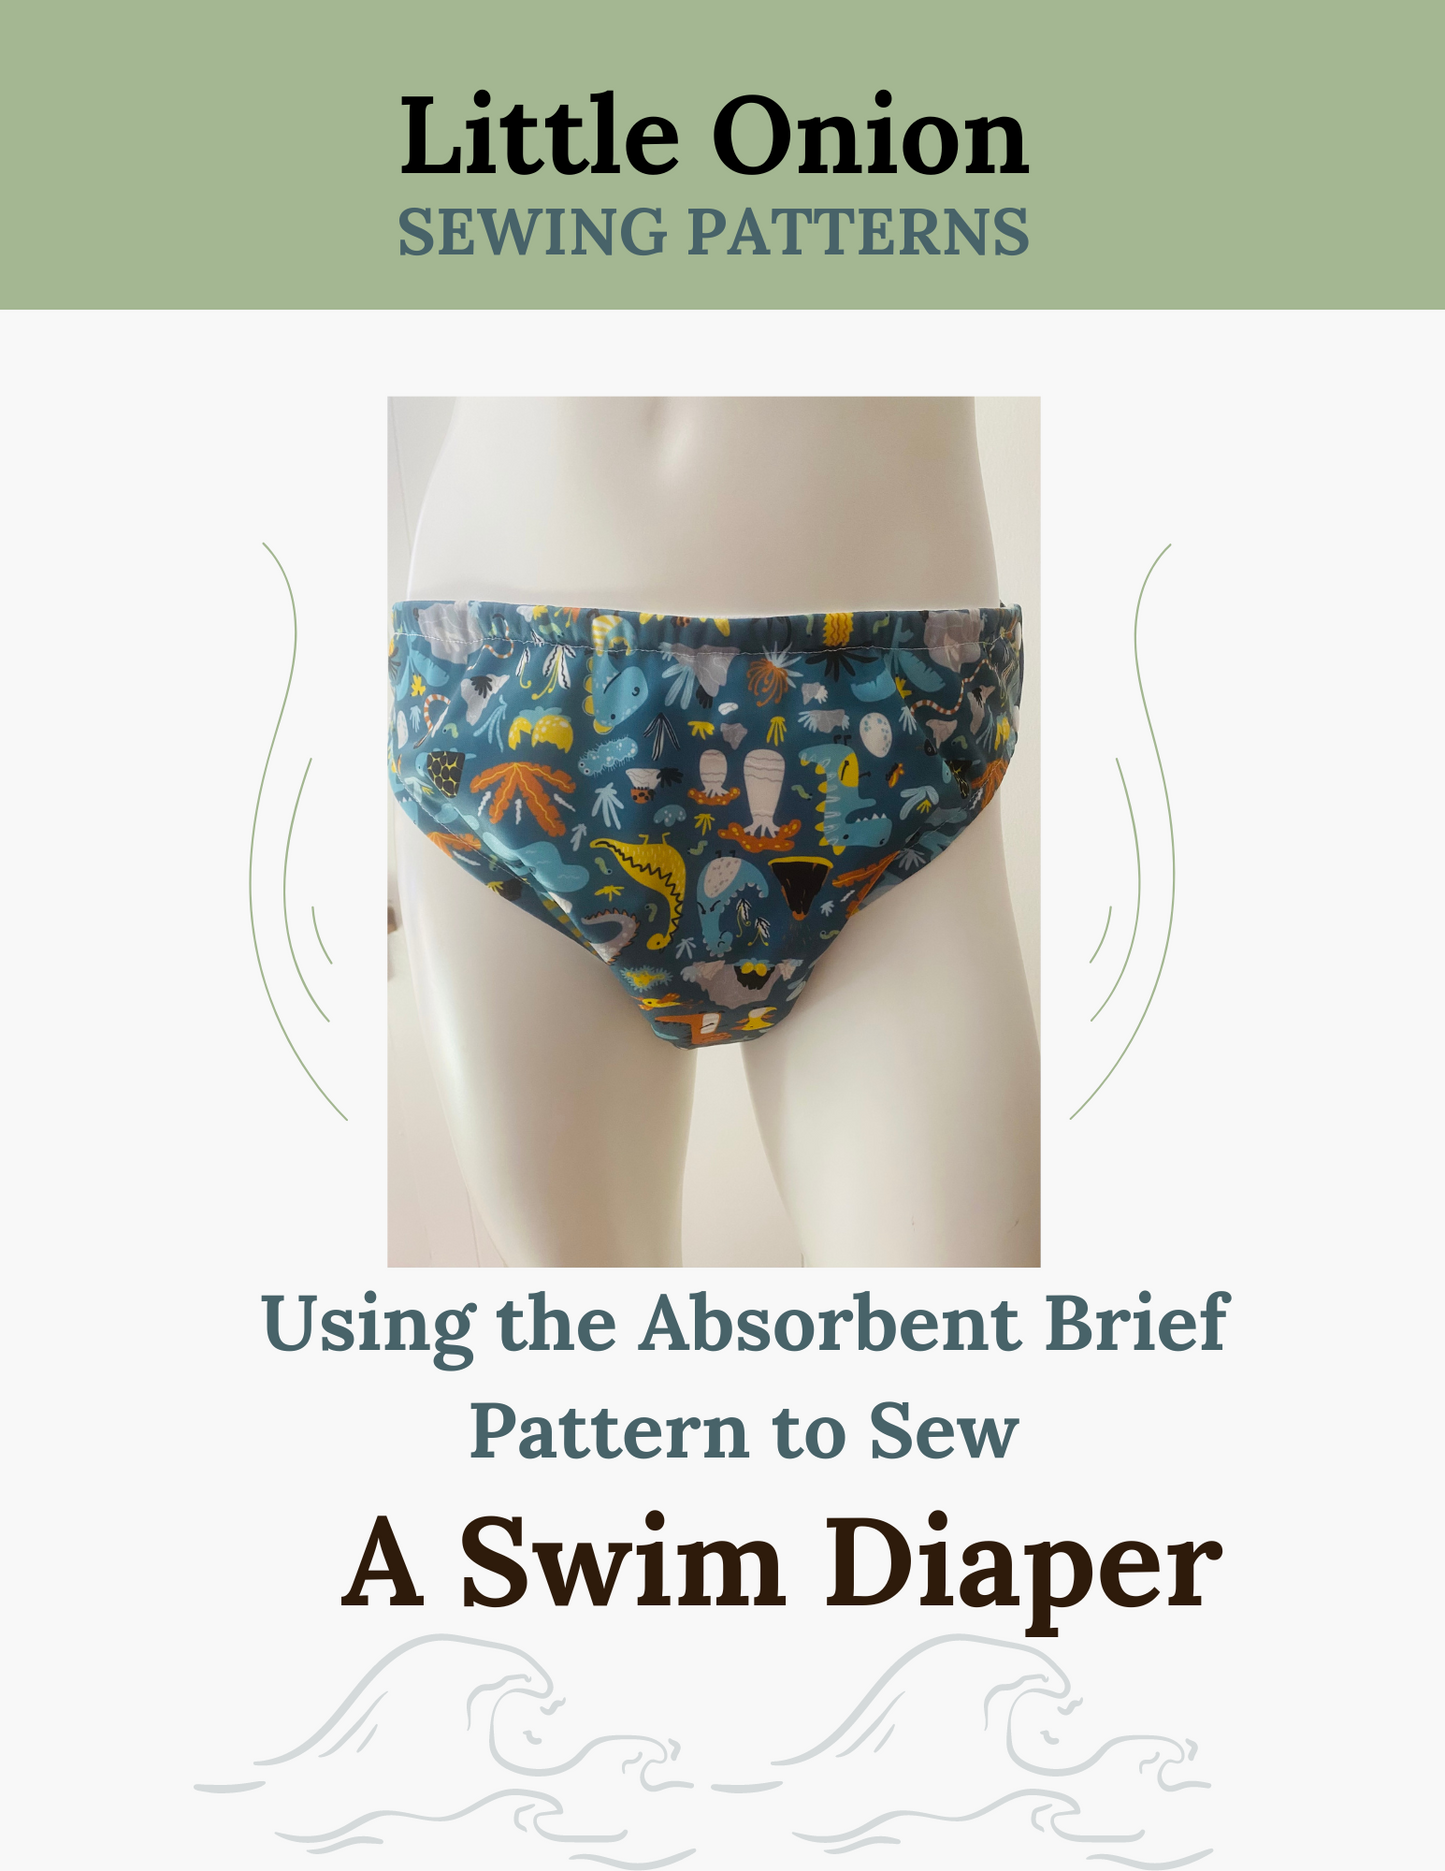 Swim Diaper Guide for Absorbent Brief Pattern